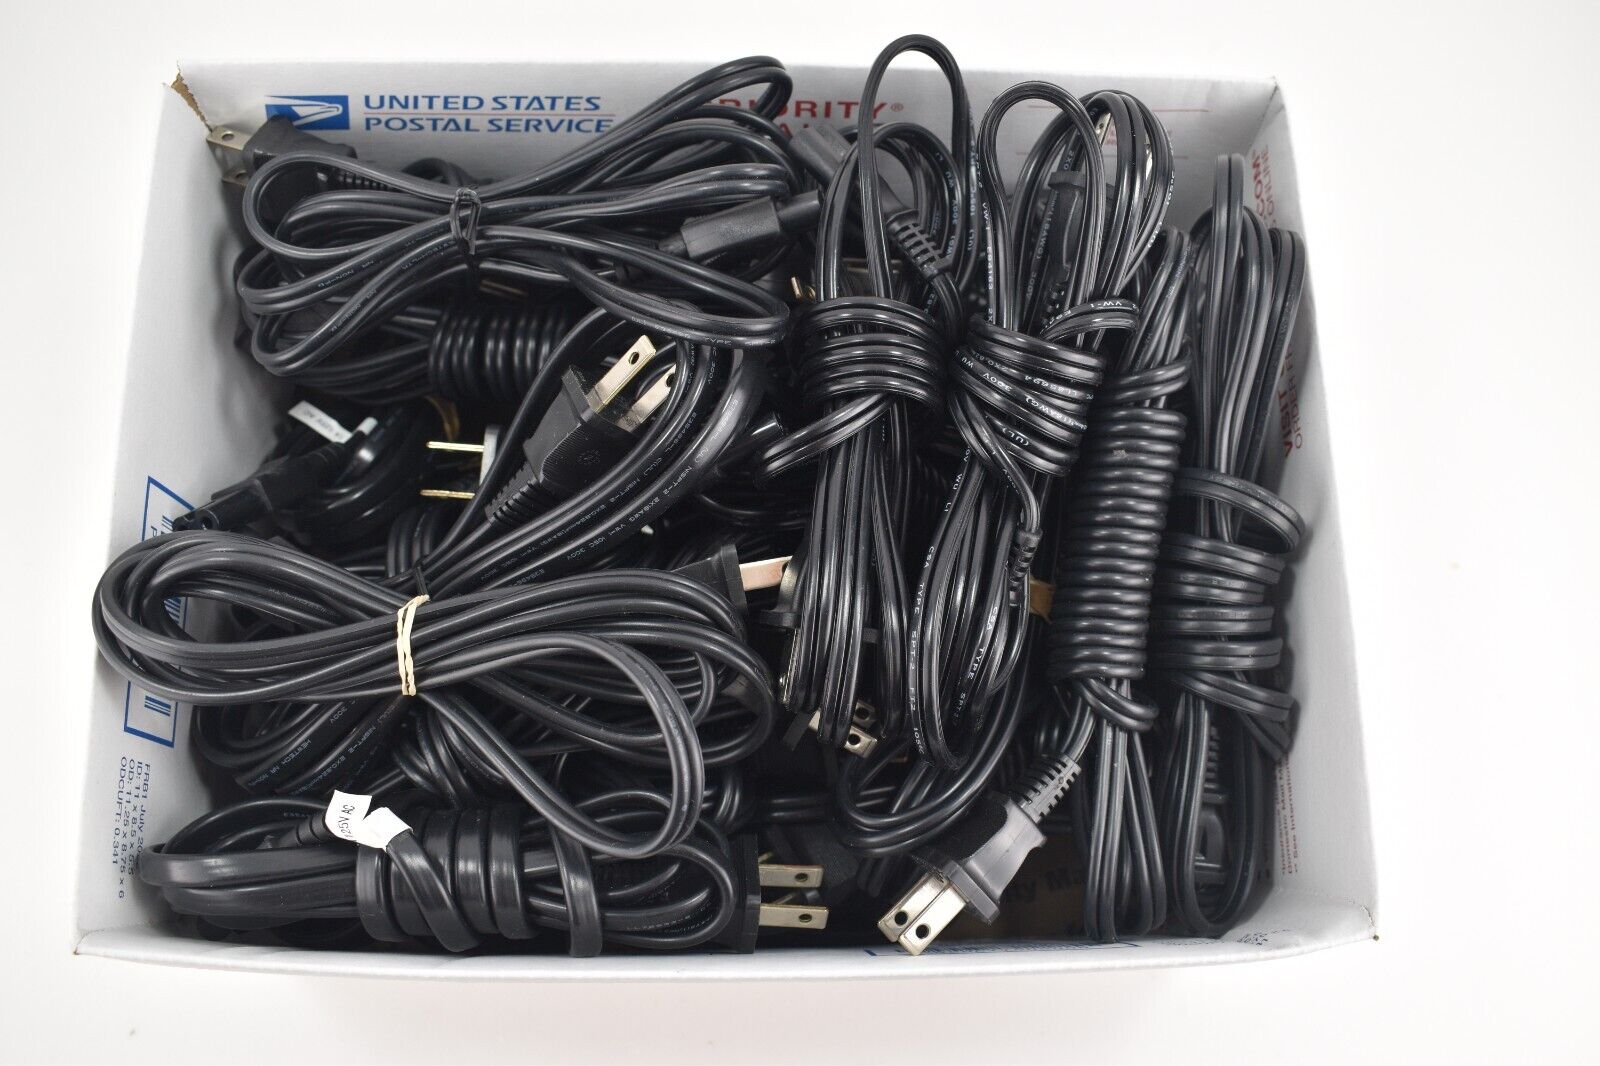 Lot of 10 Two-Prong 6.75ft AC Power Cord Cables NEMA 1-15P C7